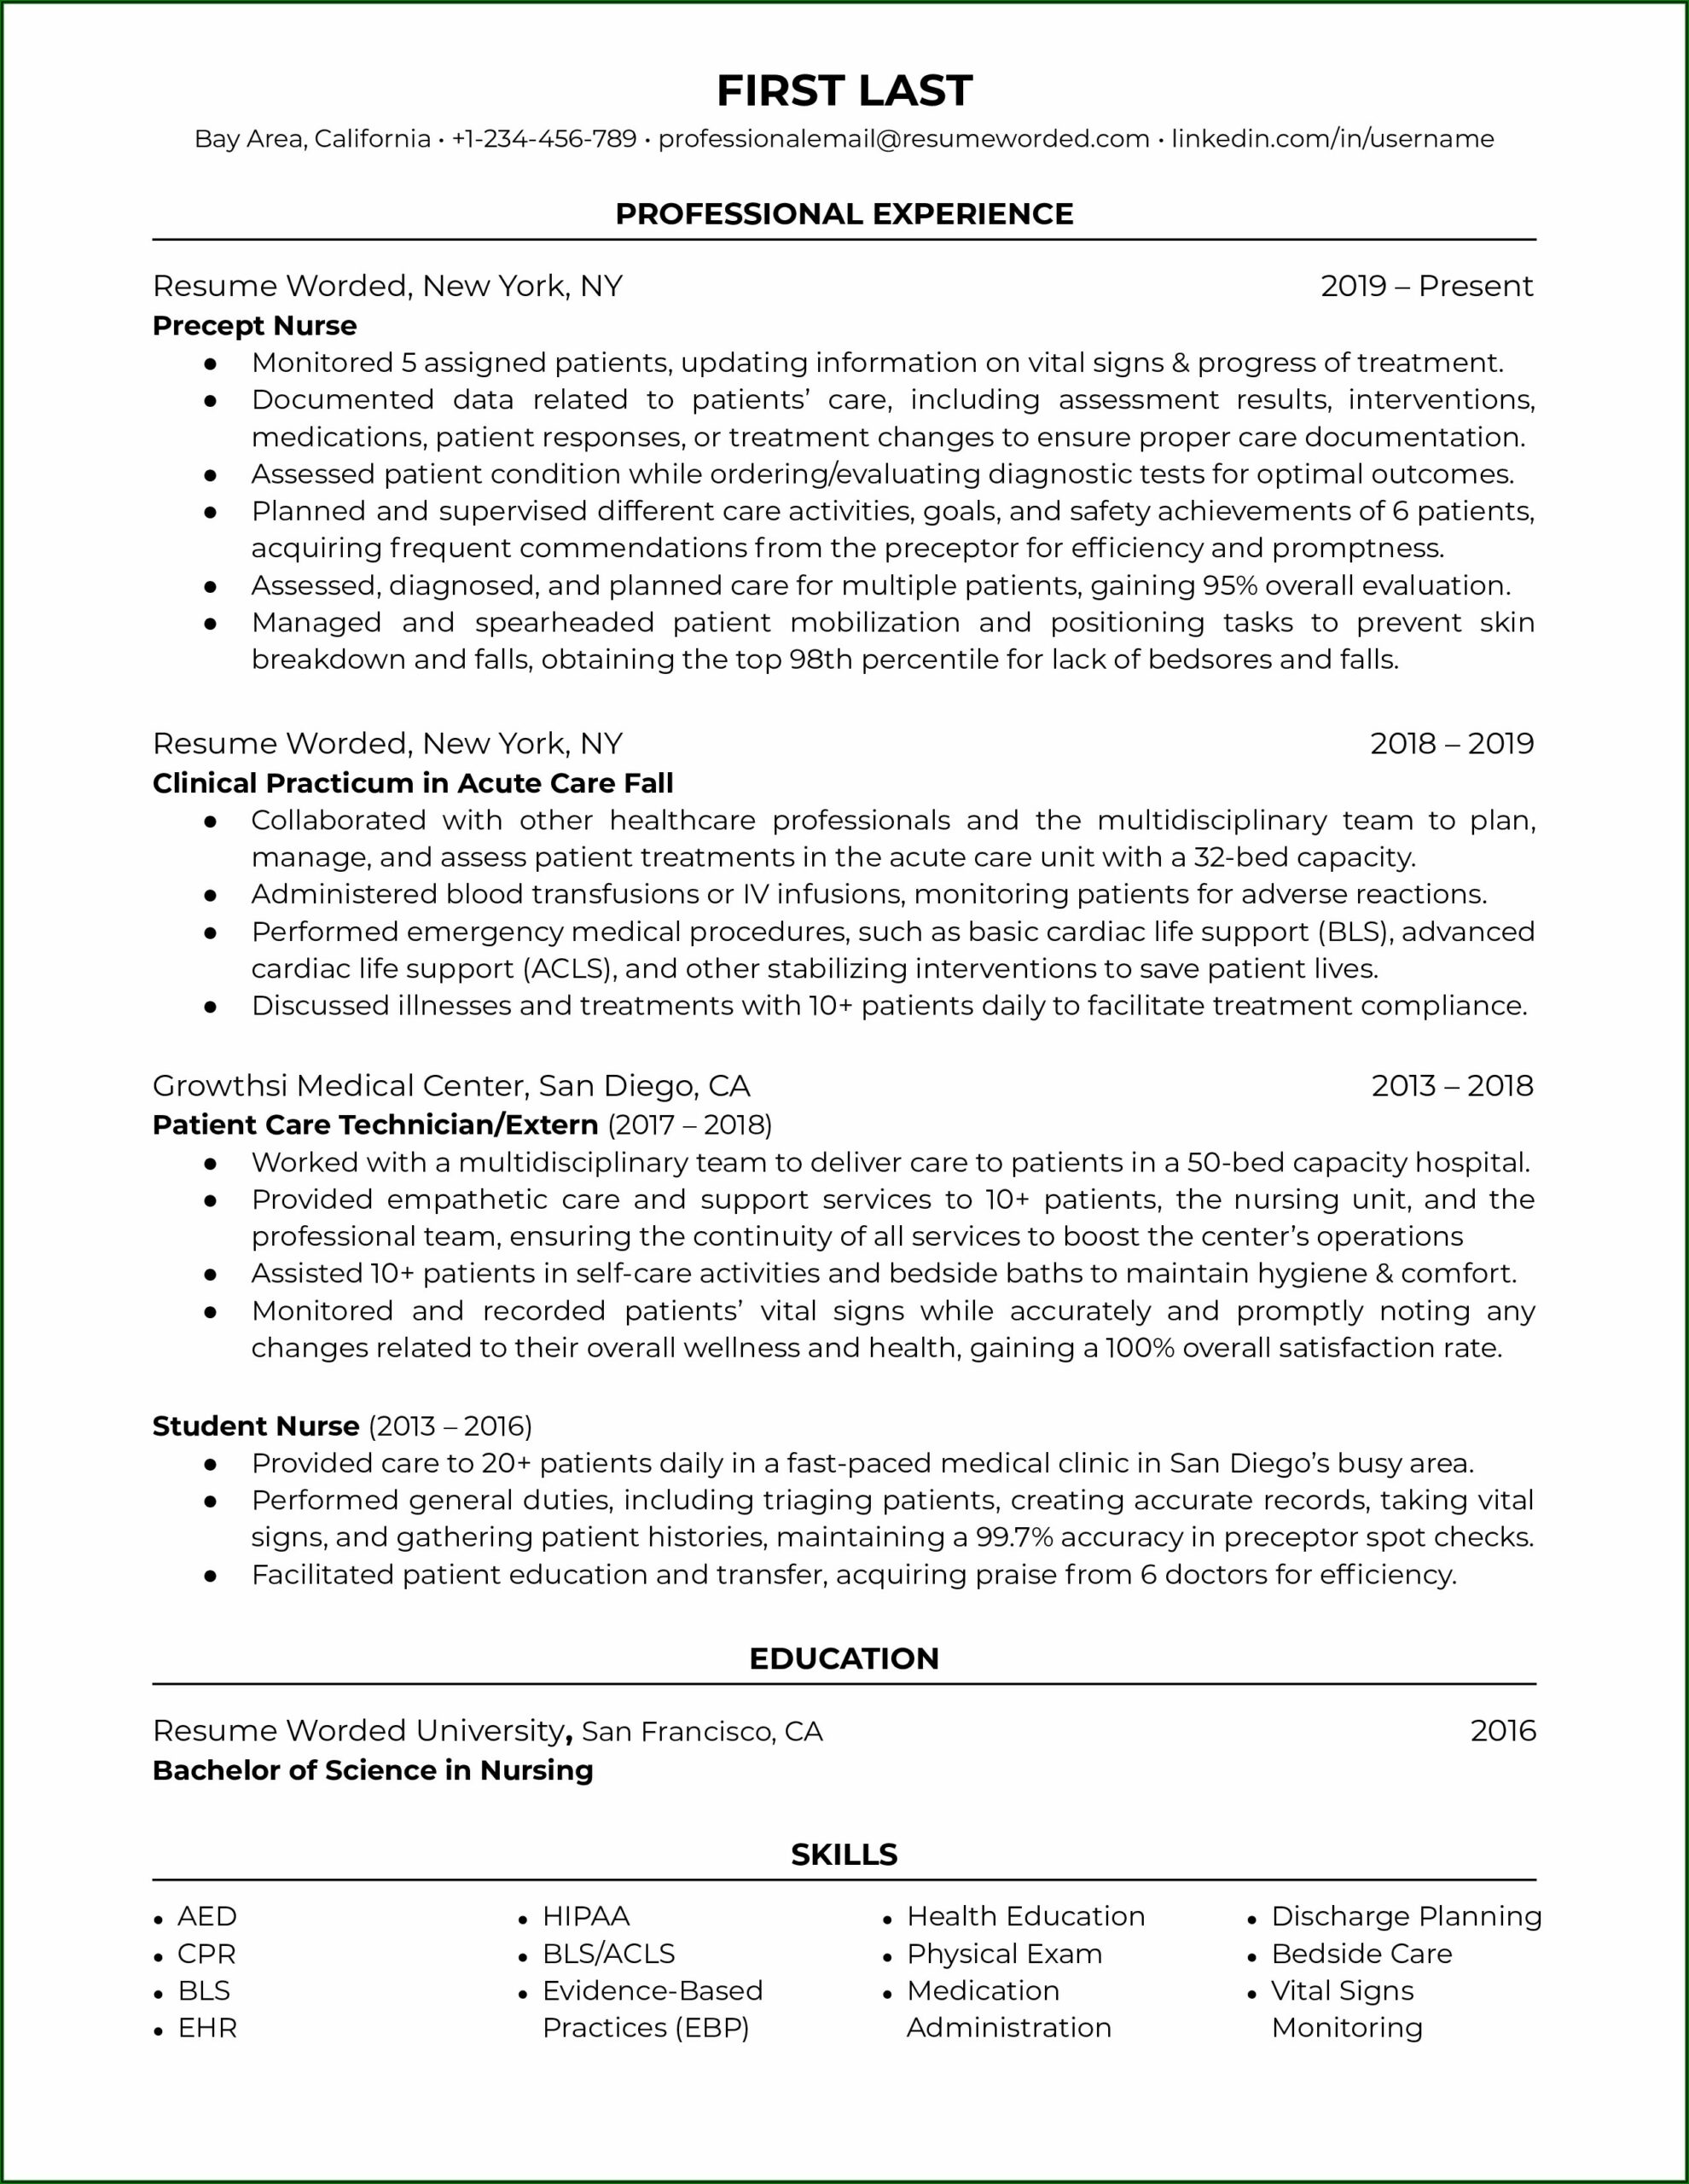 Sample Resume For Fresh Graduate Nurses With No Experience